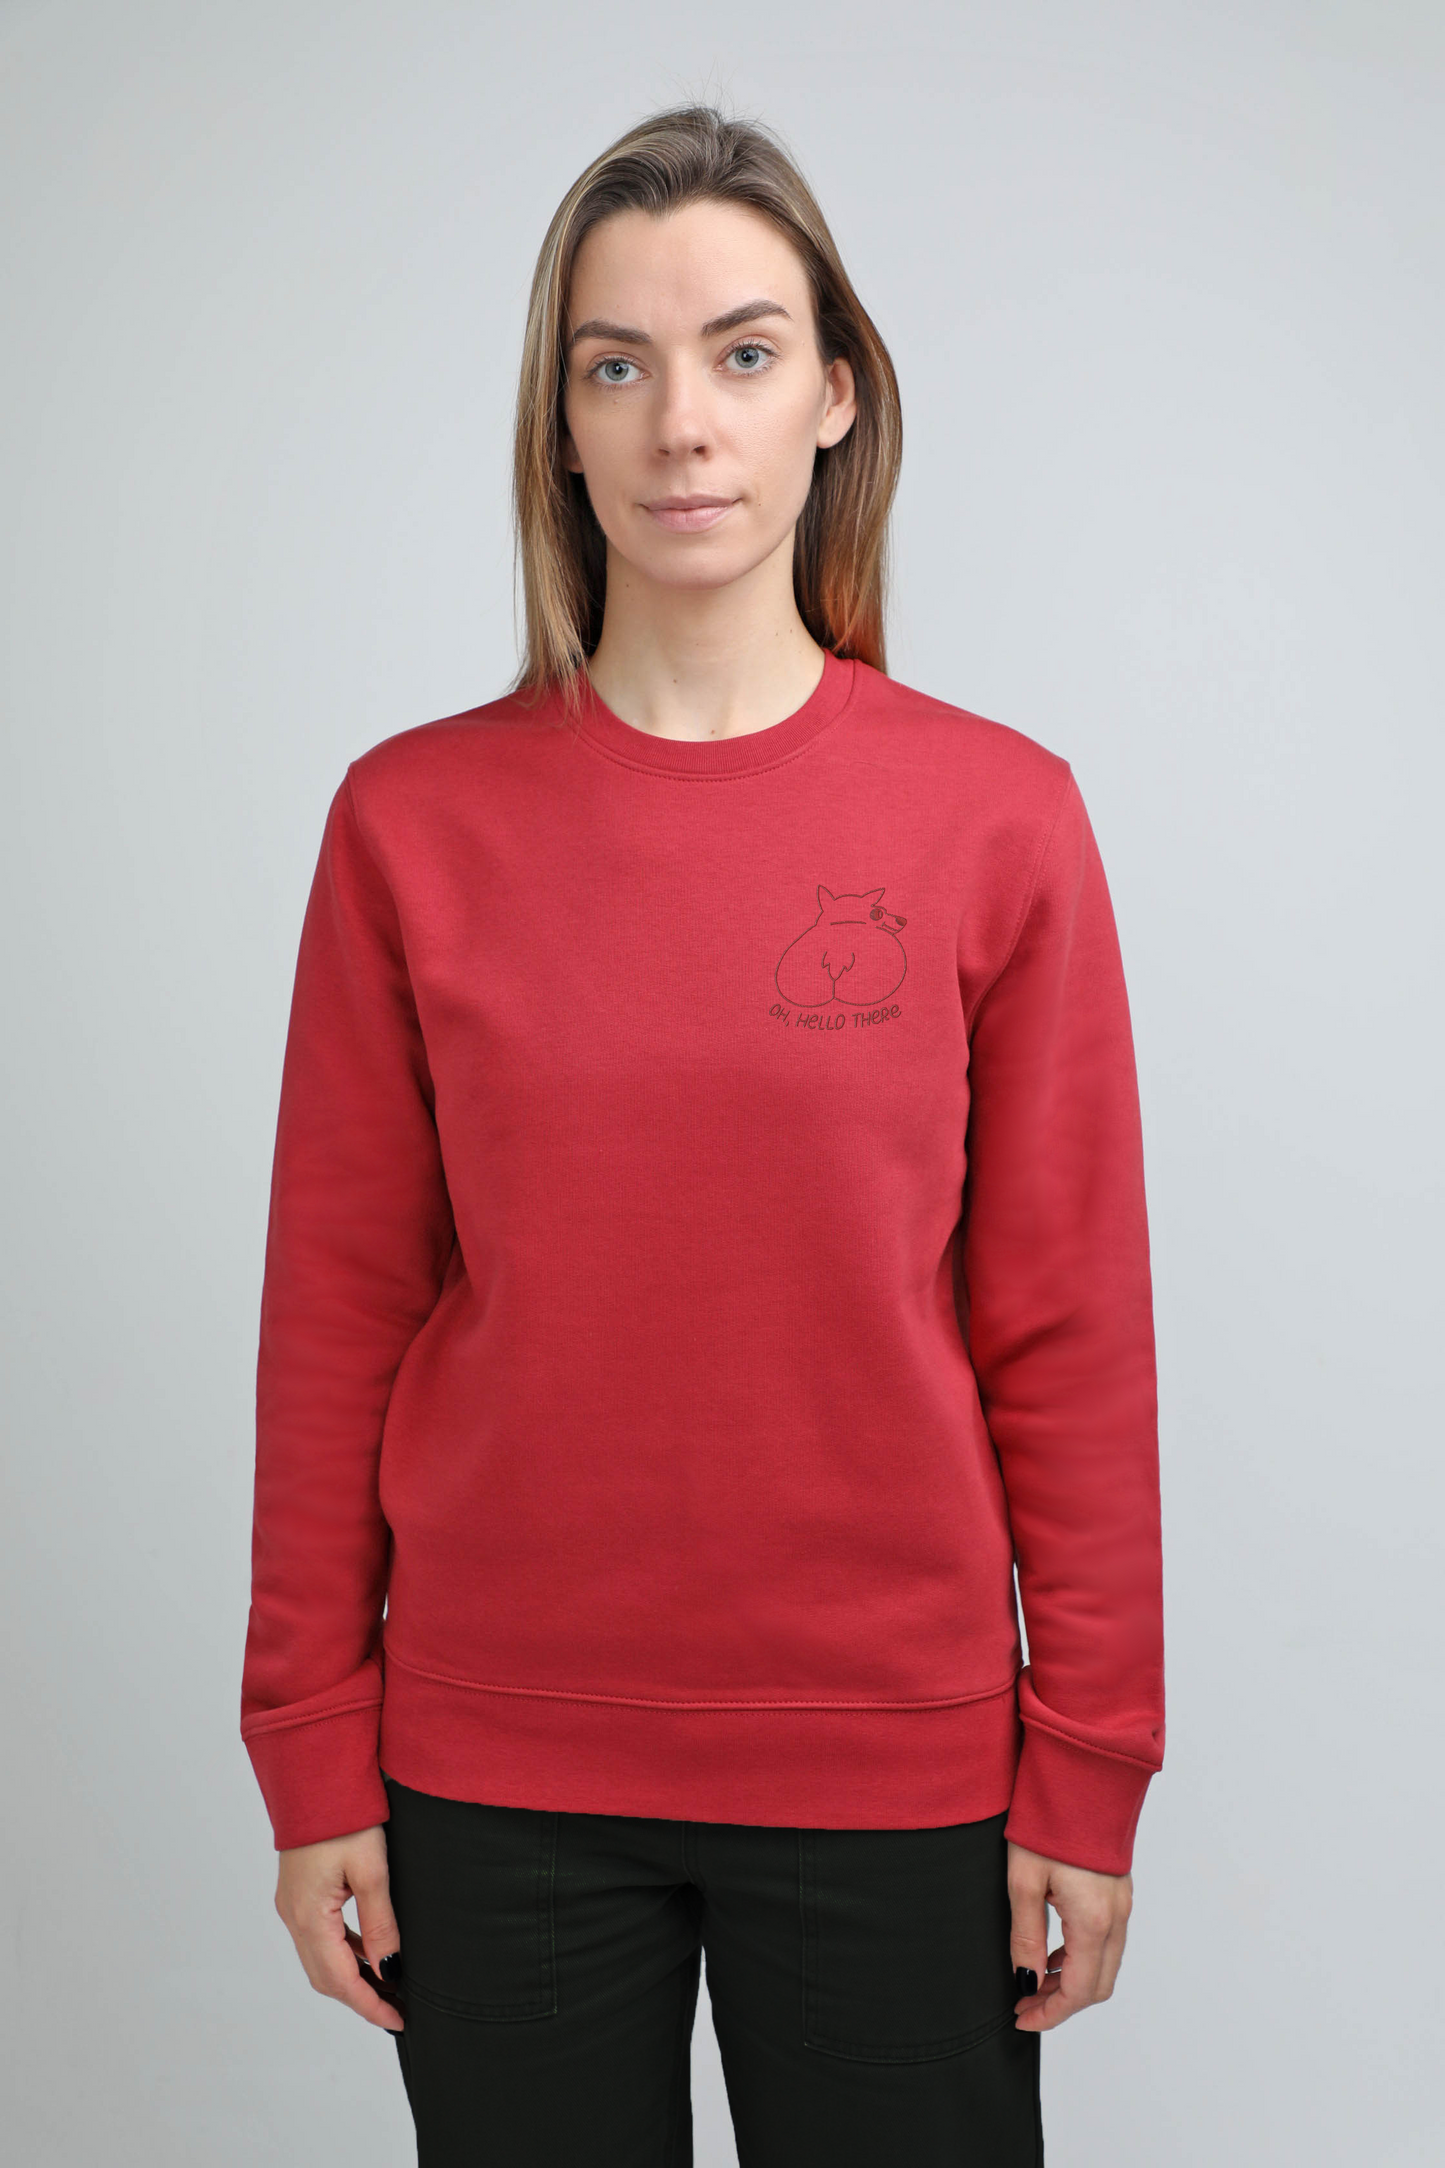 XL available only | Oh, hello there! | Crew neck sweatshirt with embroidered dog. Regular fit | Unisex by My Wild Other